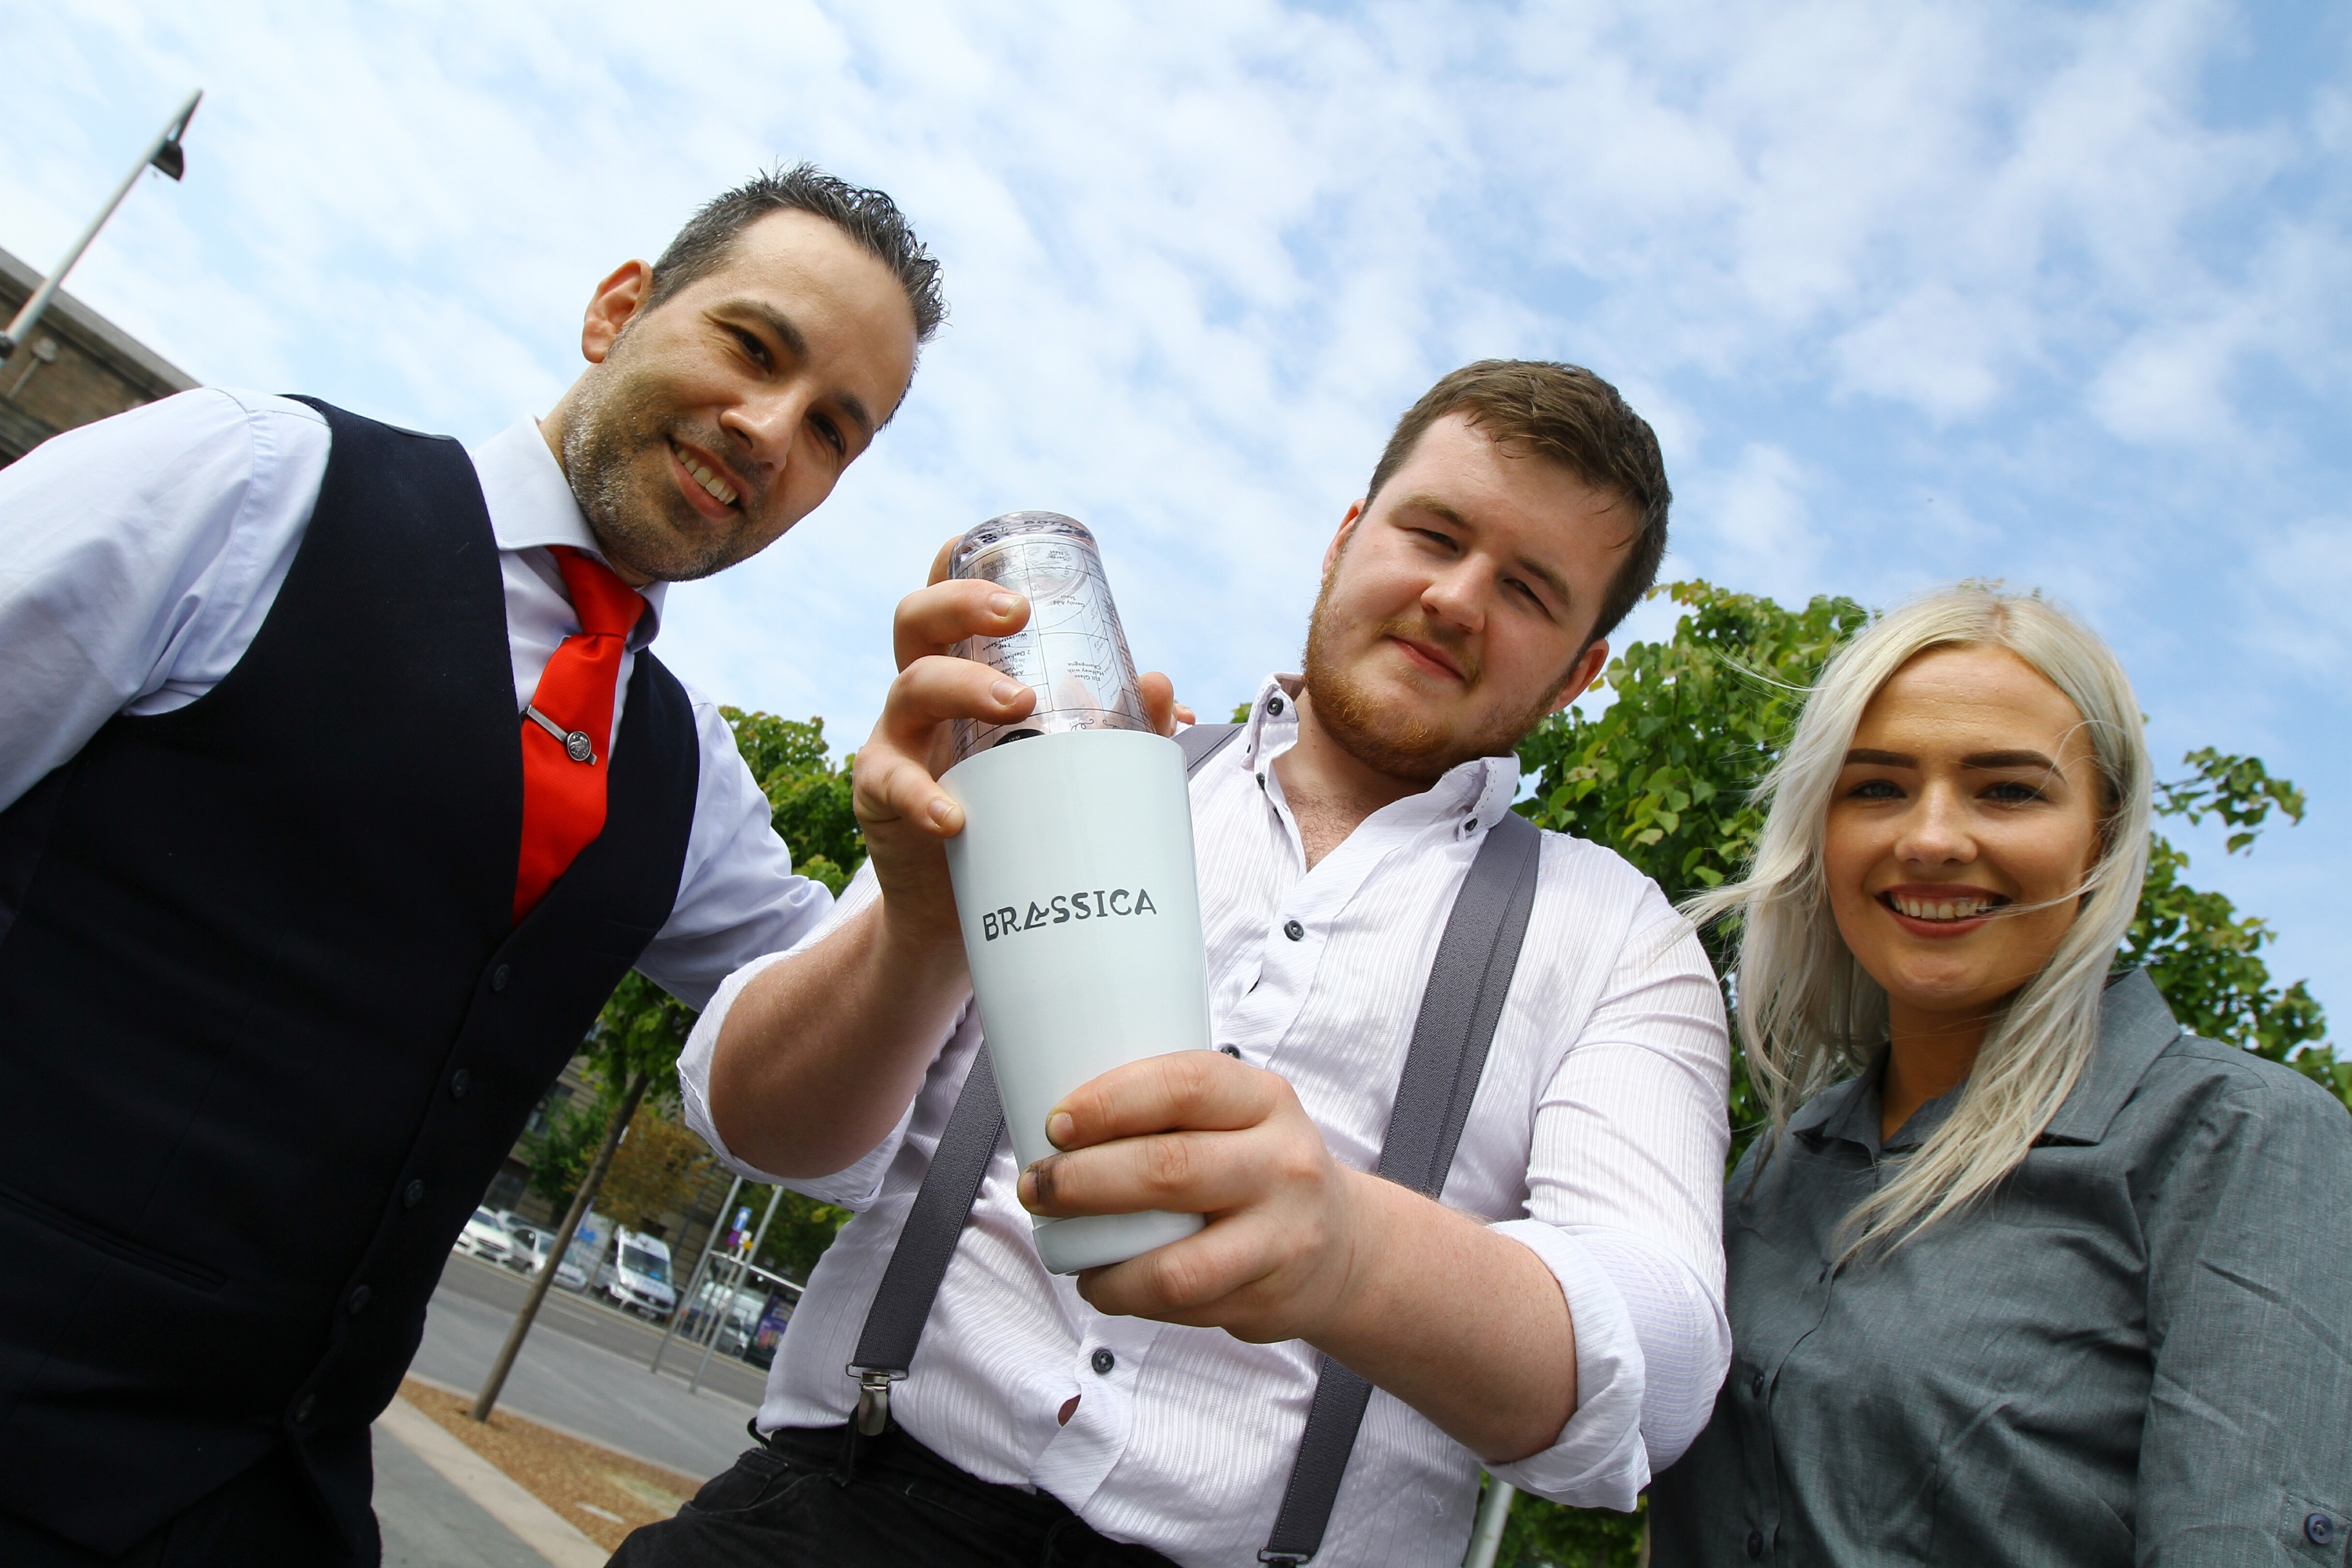 Nikos Matsikas - general manager of Brassica, Stuart Carr - barman, with his thermal cocktail shaker, and Leoni Robertson - hostess,